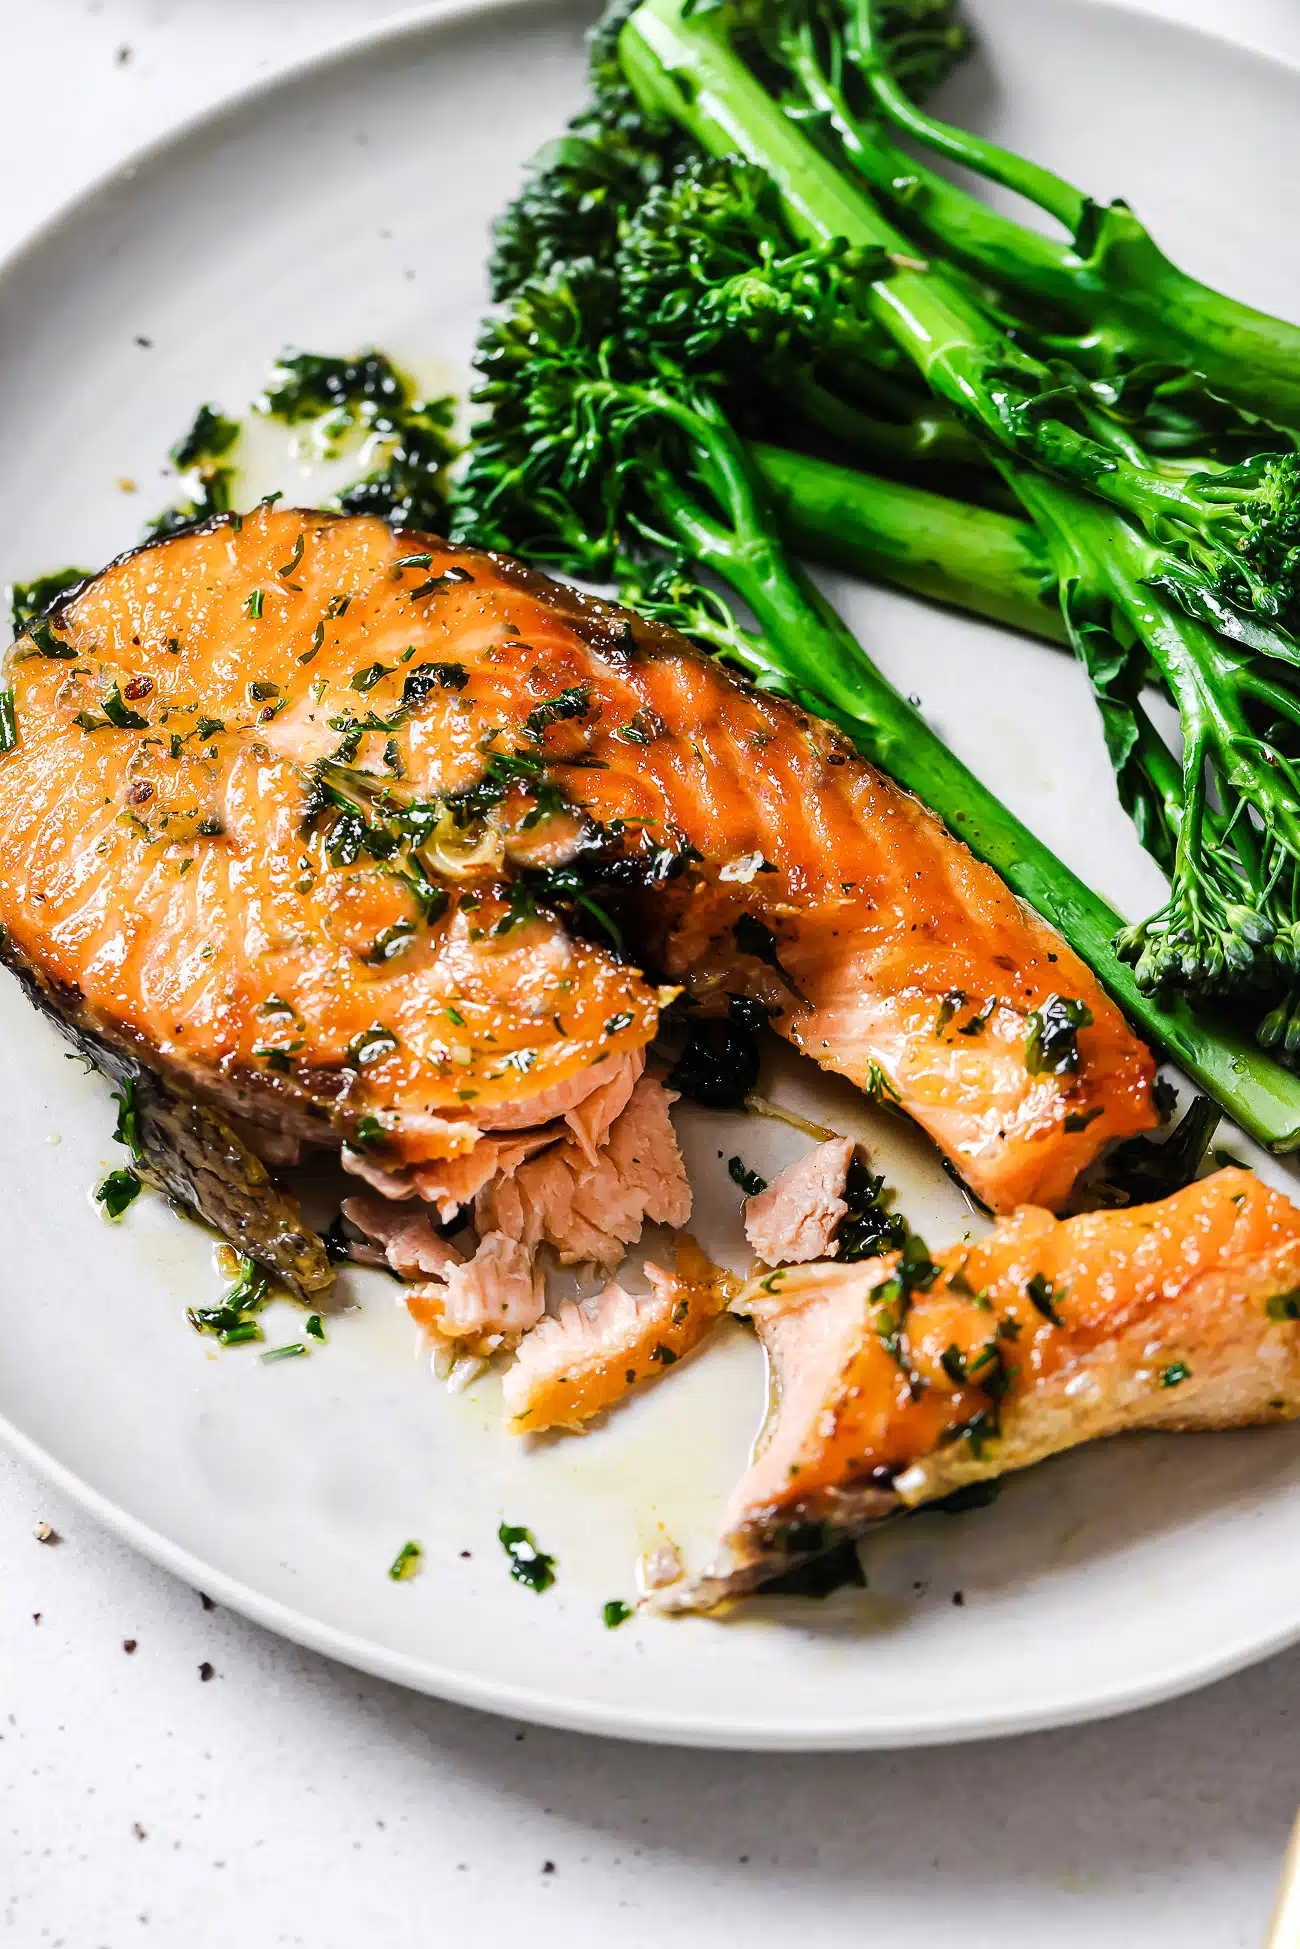 Garlic butter salmon steaks on a plate with green vegetables.